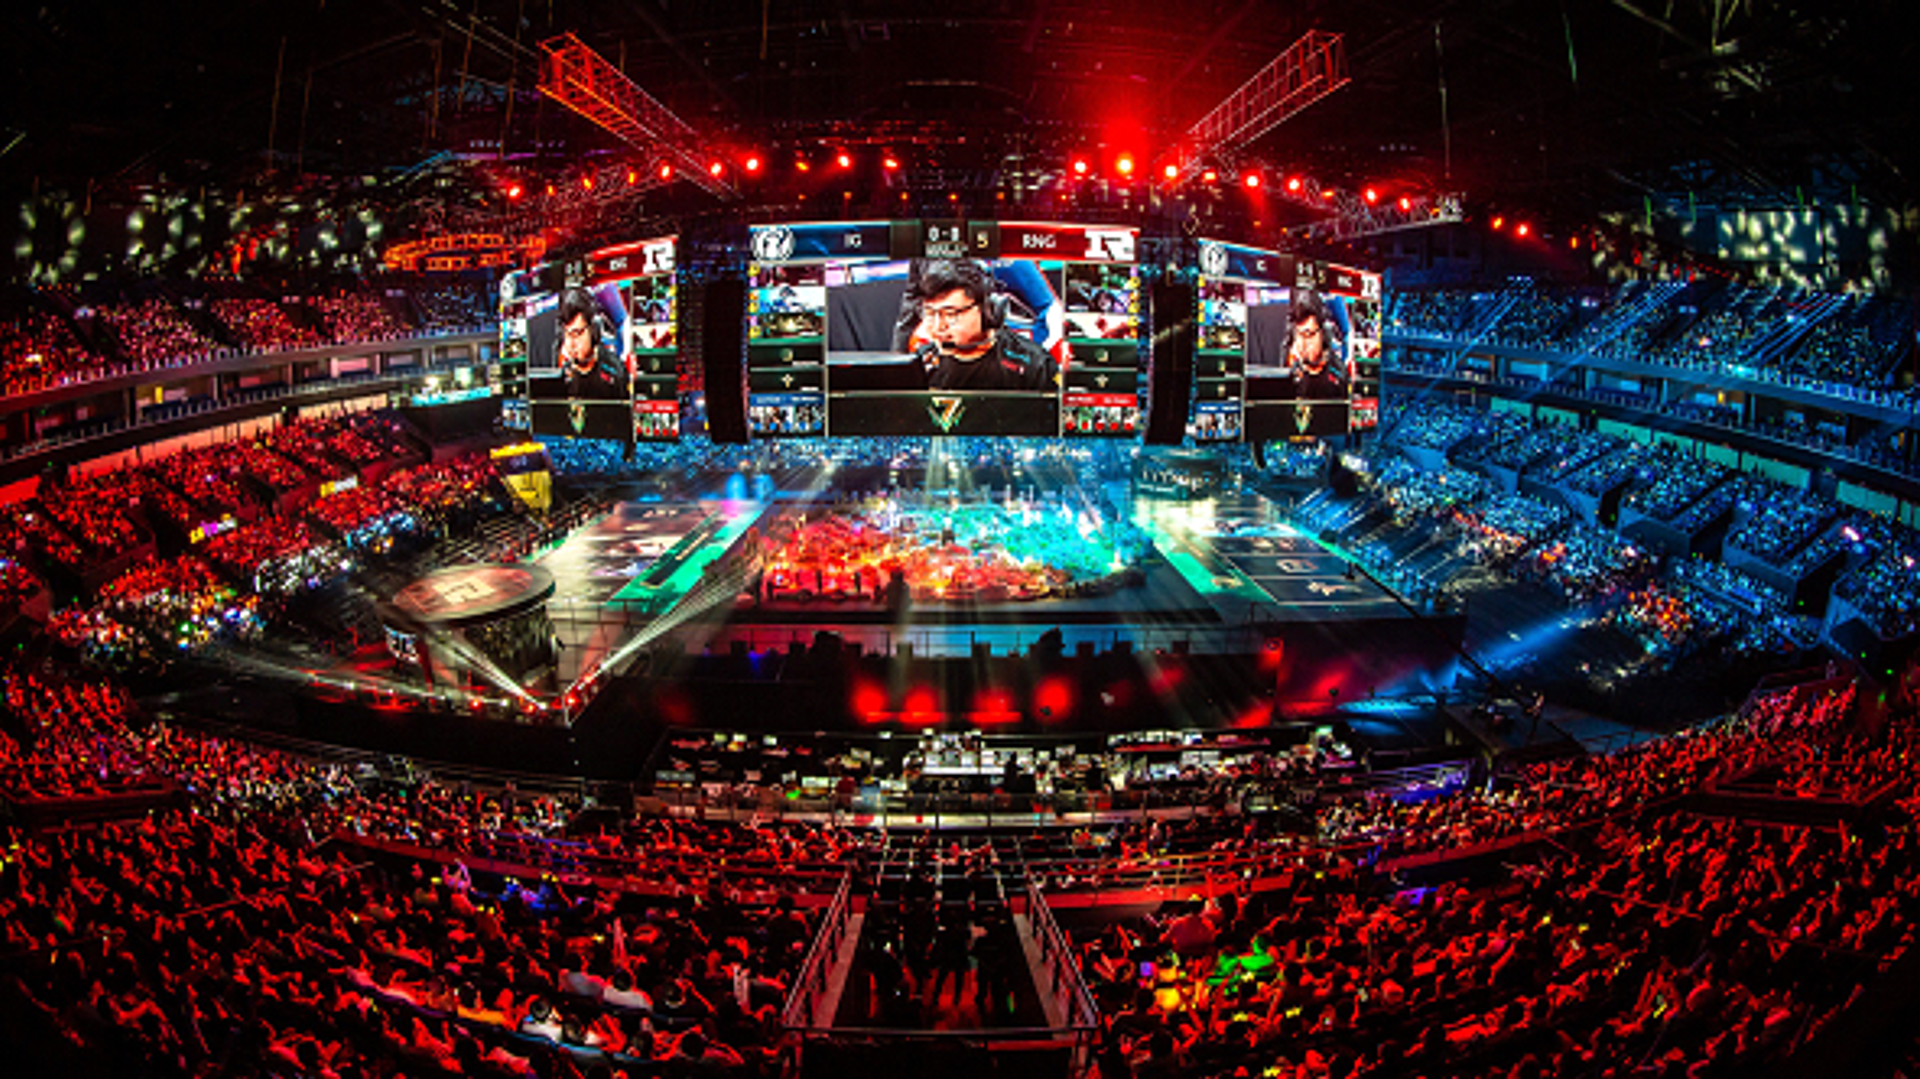 Gaming fans throng Seoul for LoL world final